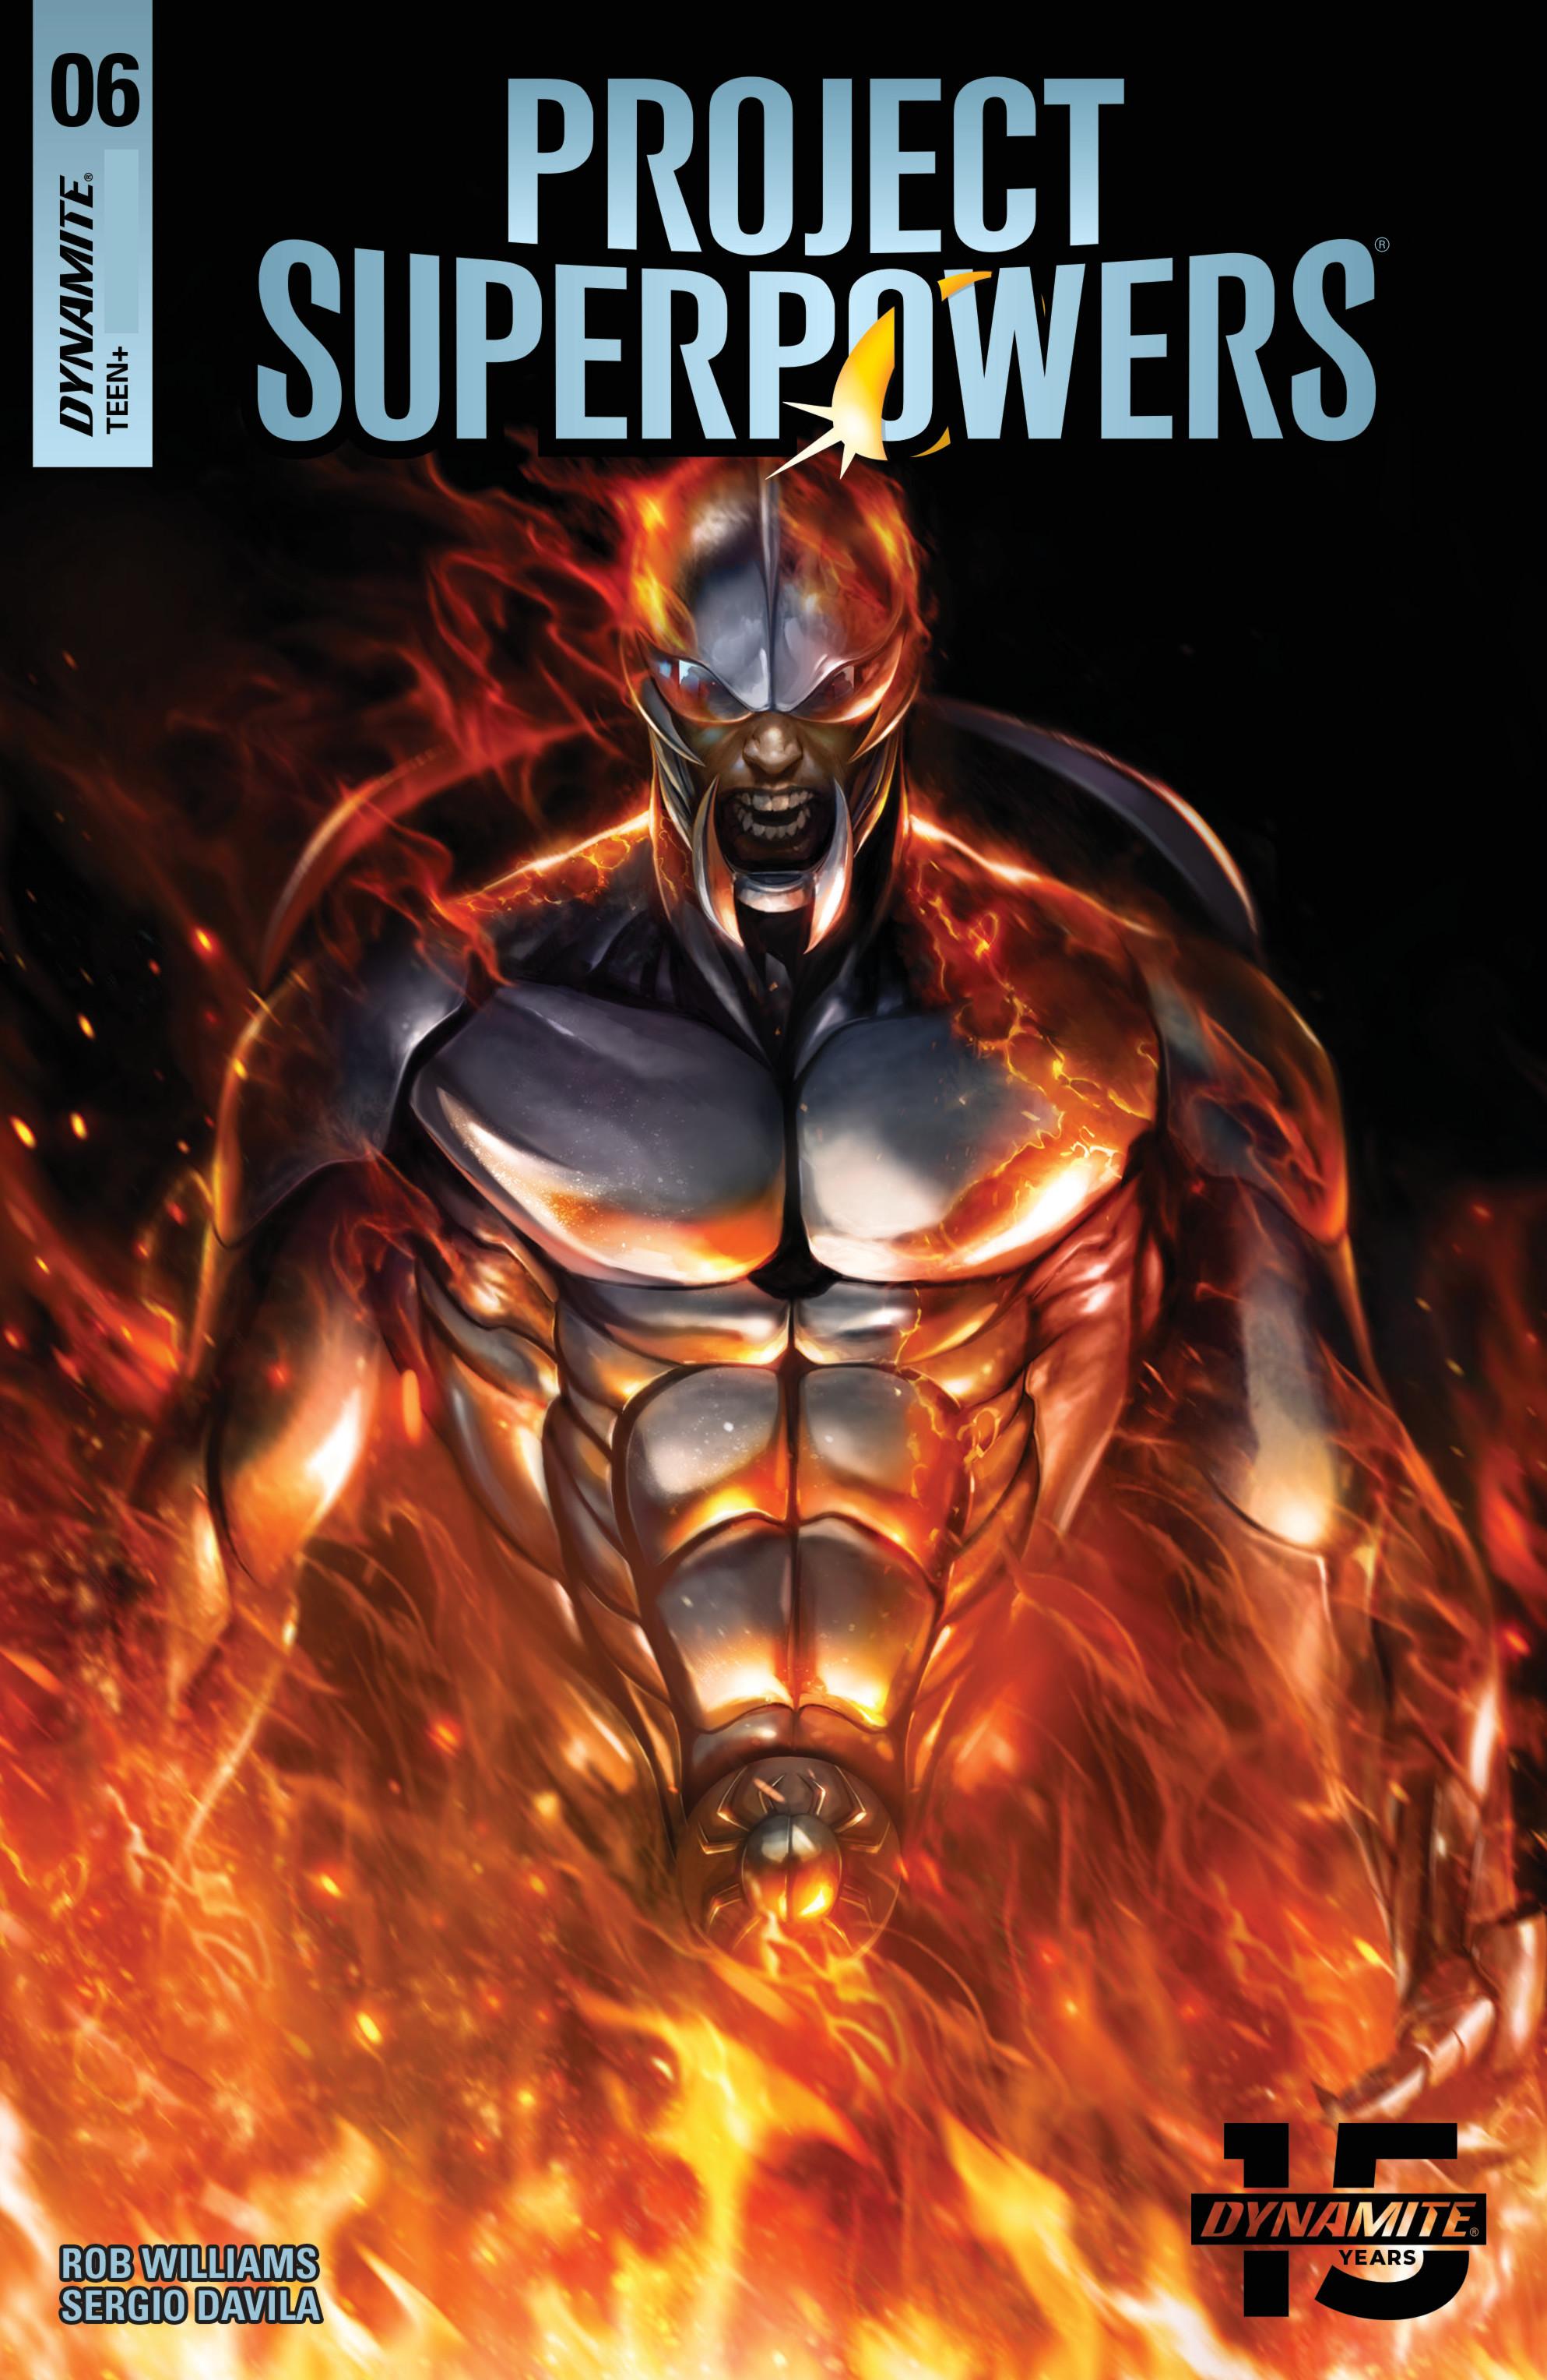 Project Superpowers-Chapter Three 006 2019 6 covers digital Son of Ultron